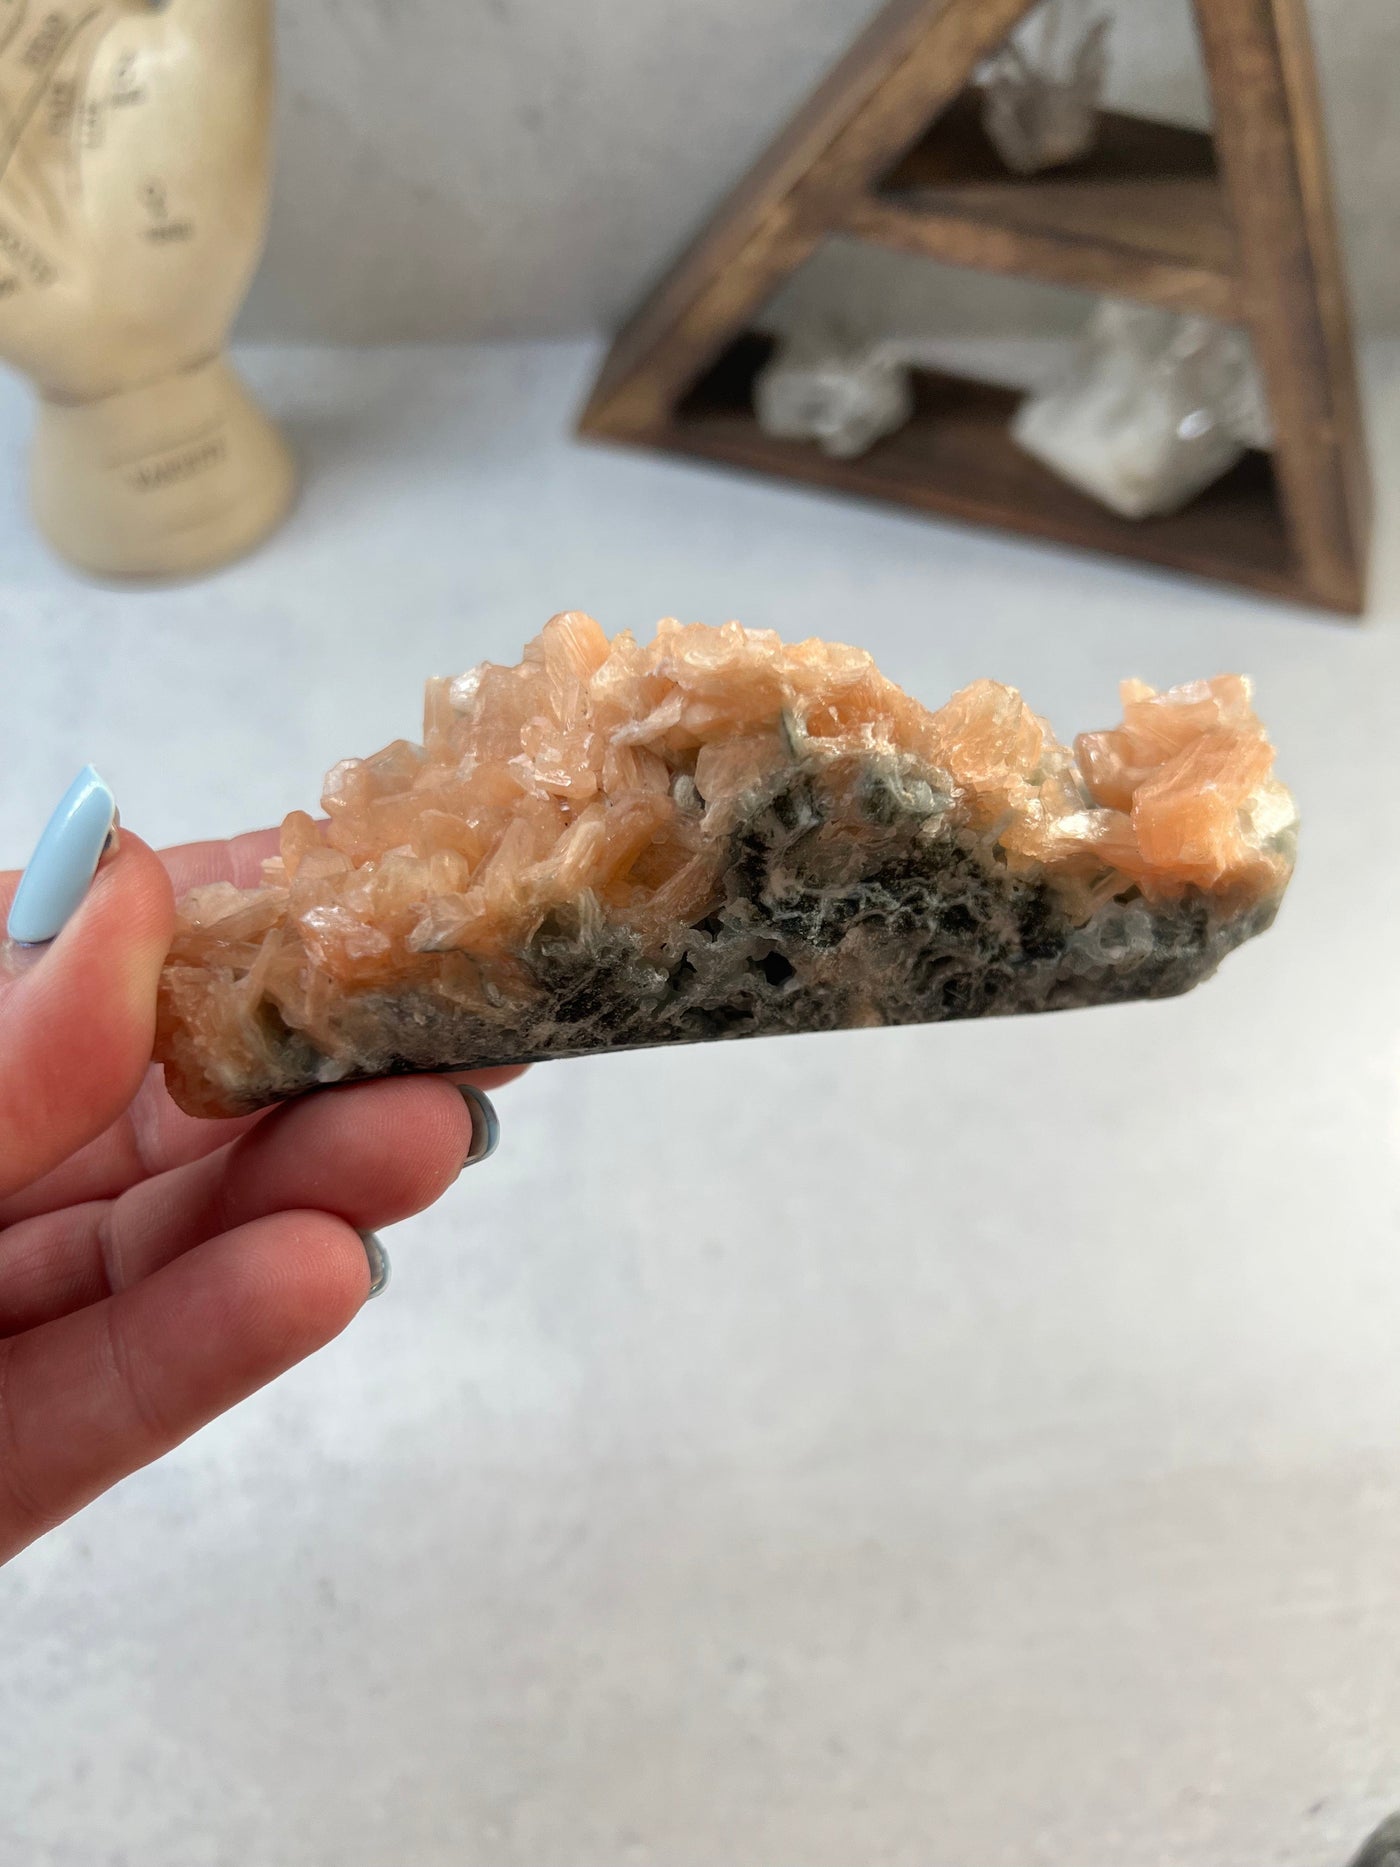 peach apophyllite with decorations in the background